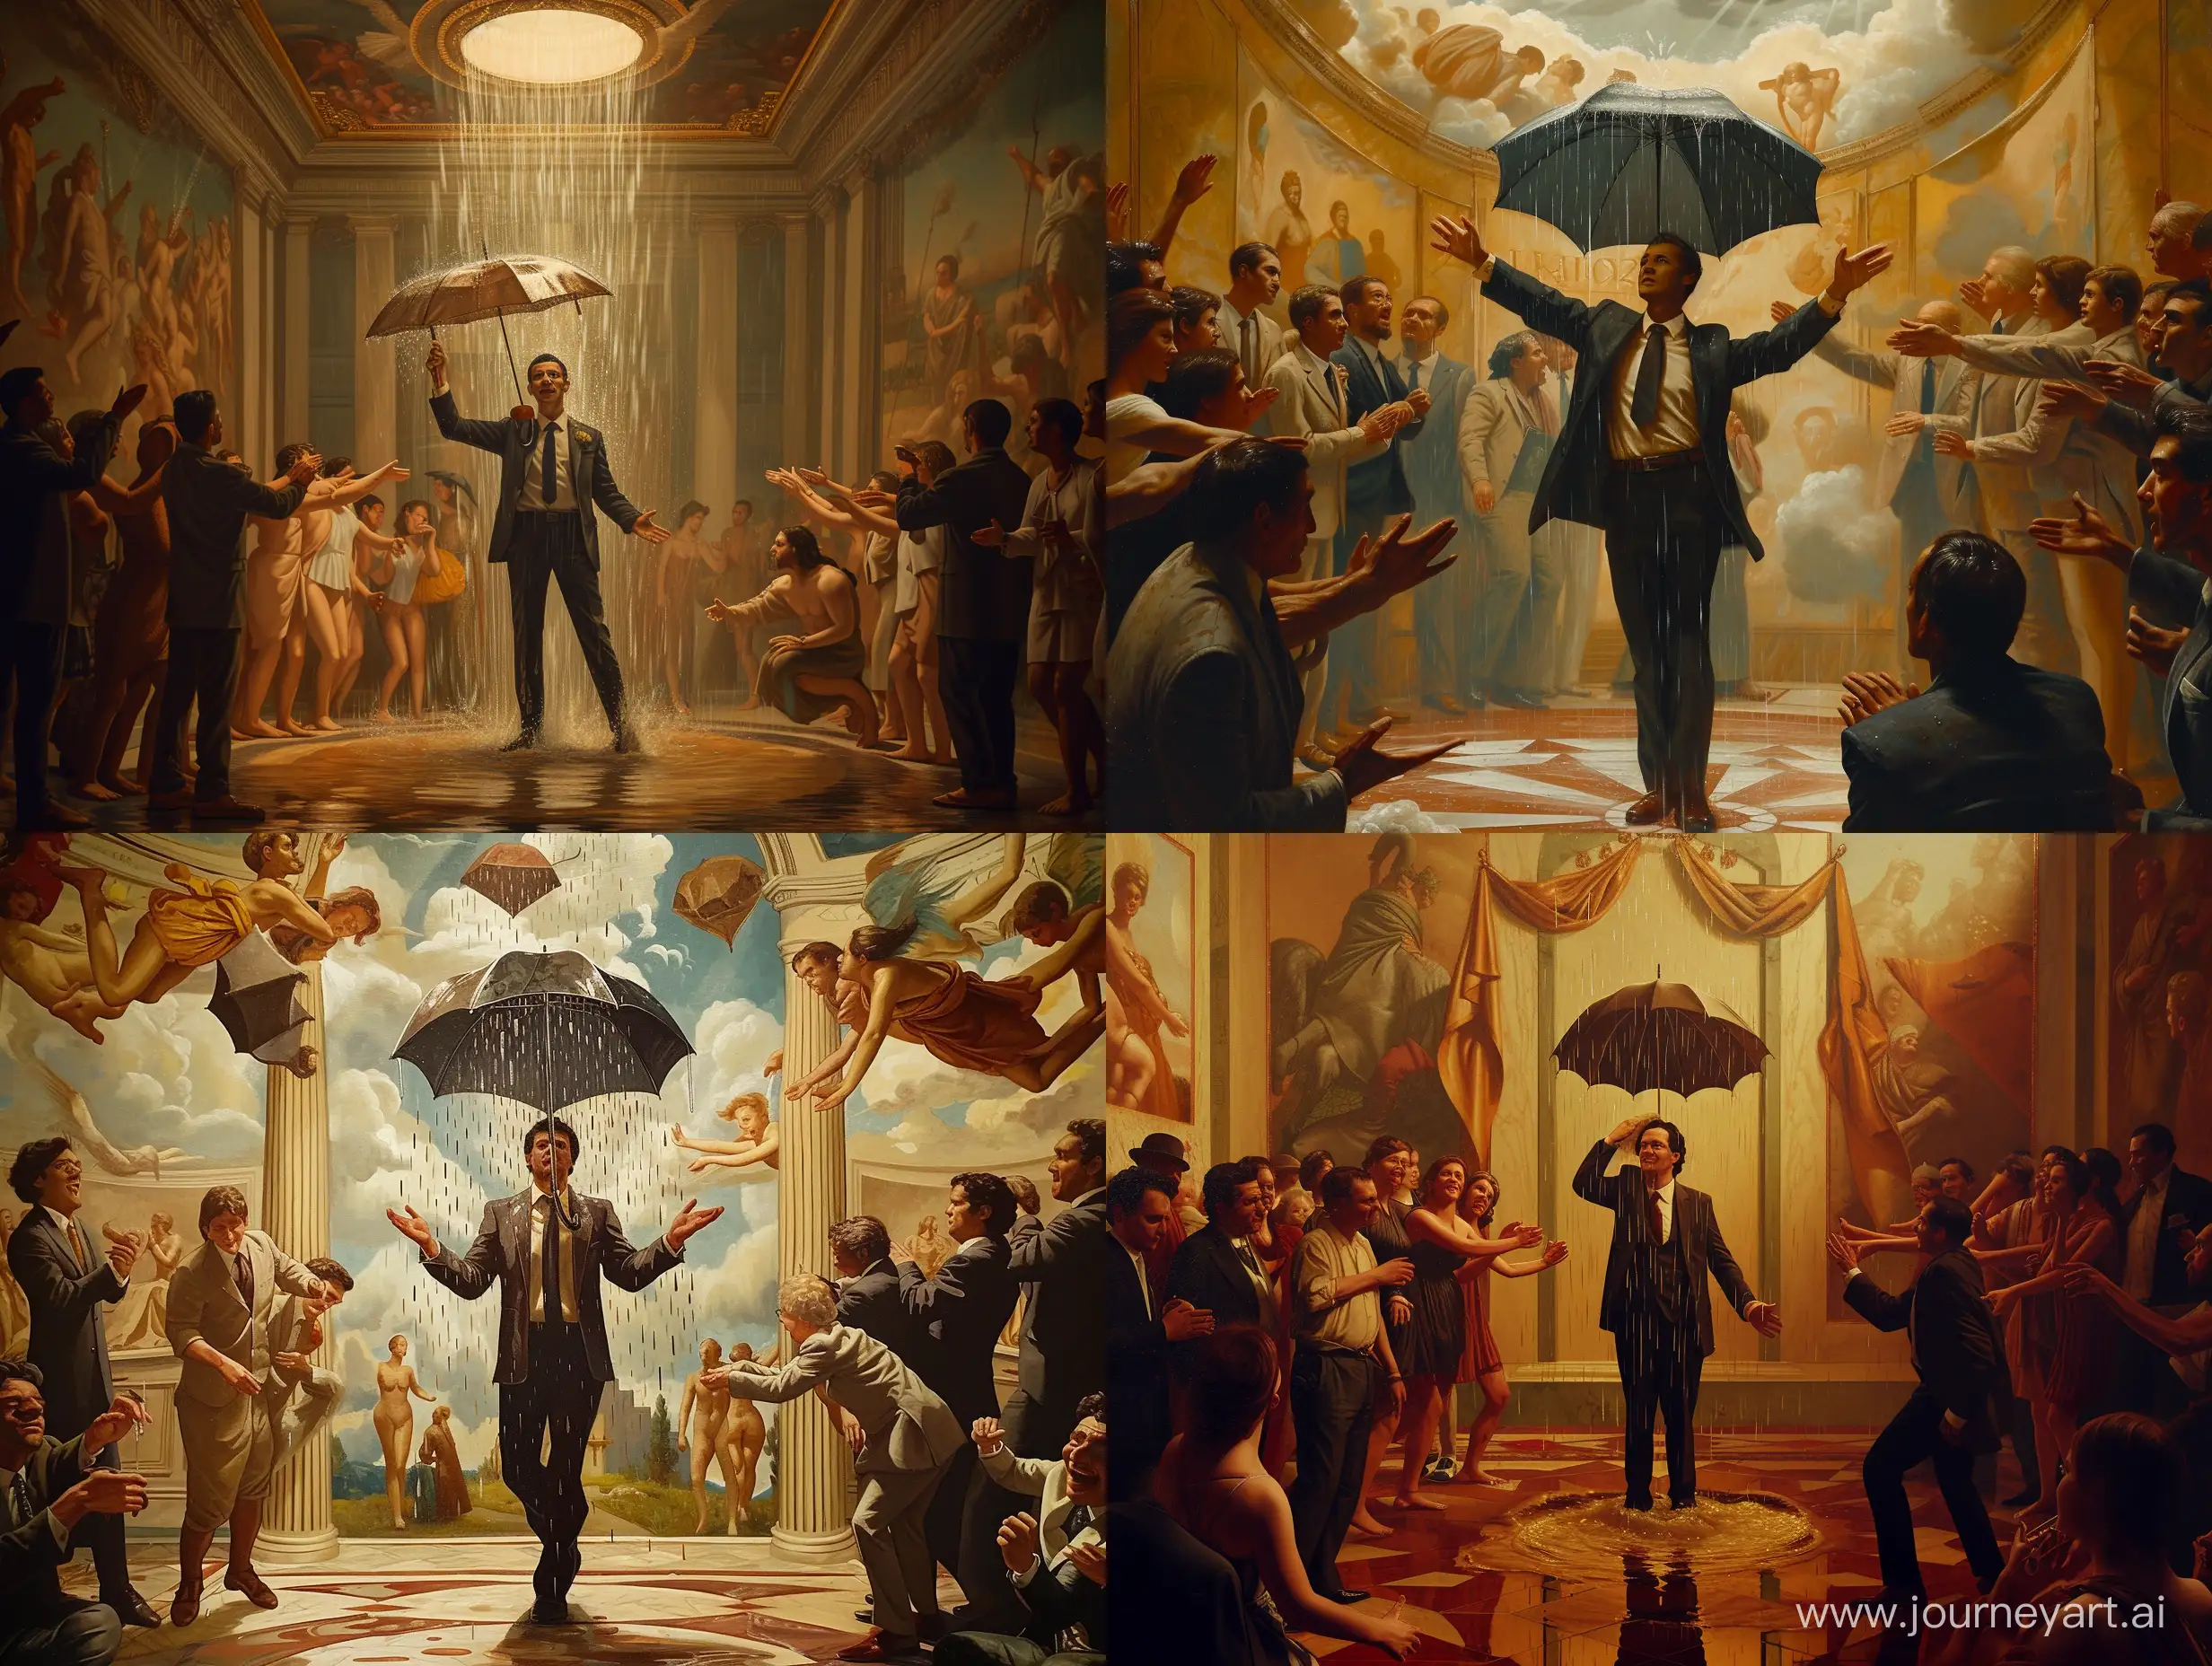 High Renaissance painting, with the man that makes rain standing in the middle, dressed in business suit and a magic umbrella over him and people praising him, michelangelo artstyle, highly detailed